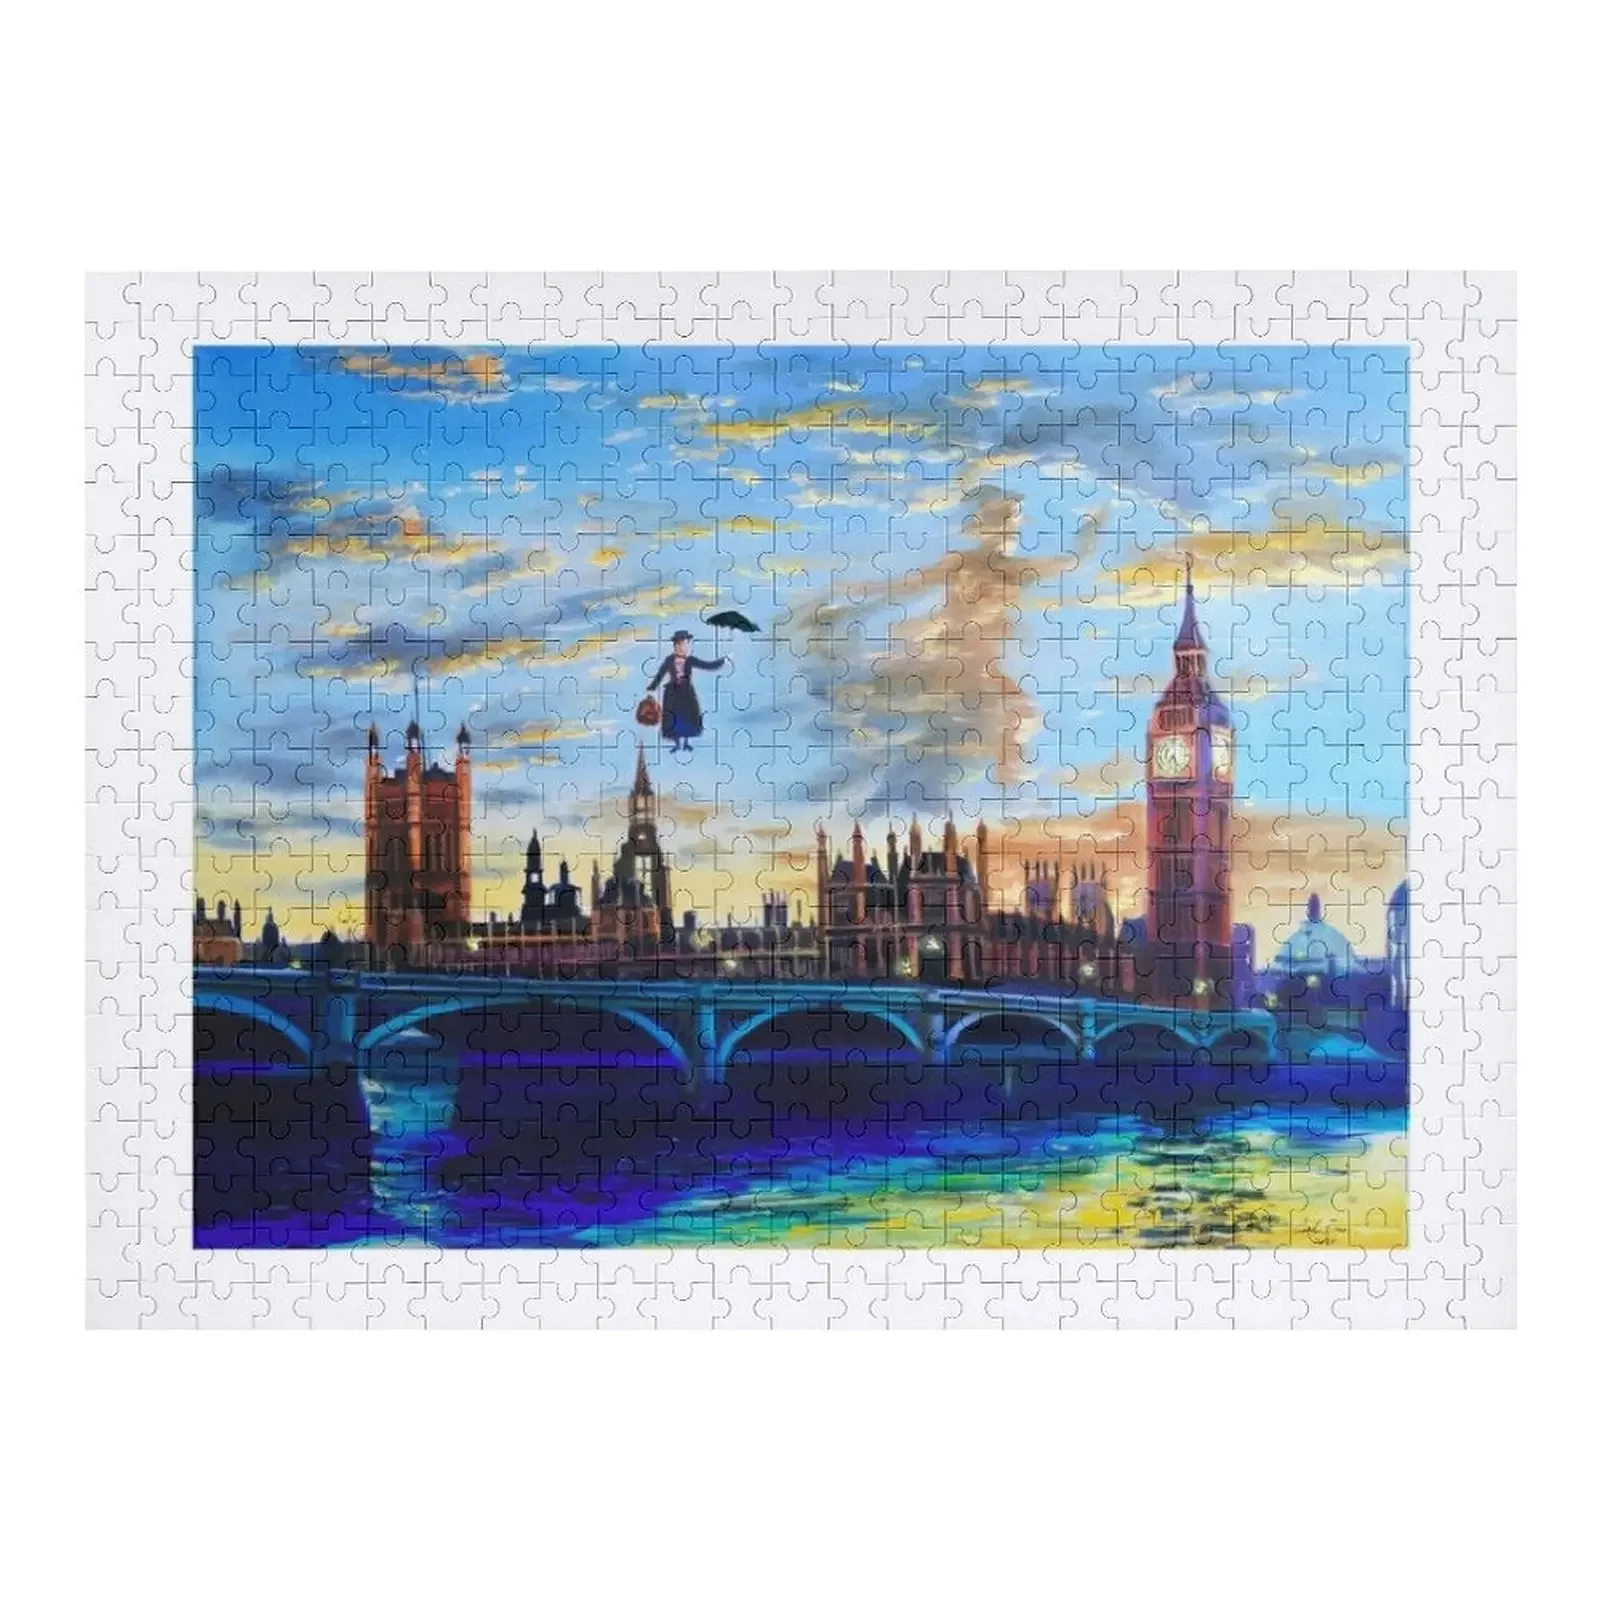 Mary Poppins returns to London Jigsaw Puzzle Diorama Accessories Toys For Children Personalized Gift Ideas Puzzle